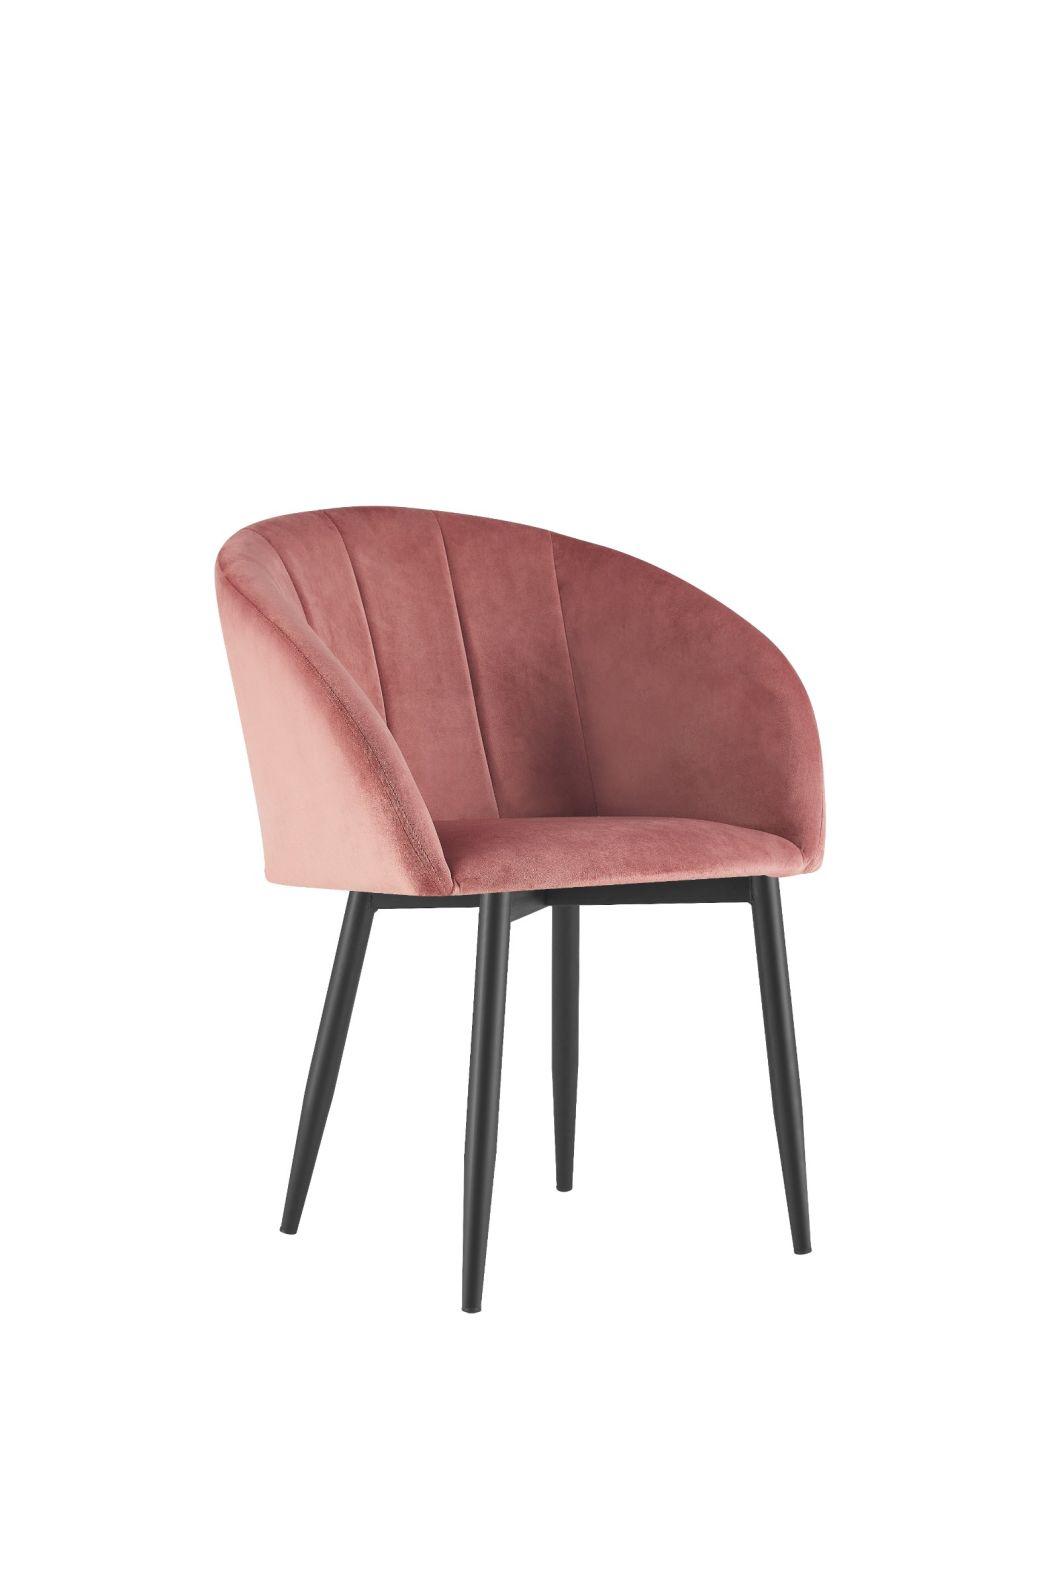 Hotel Event Metal Leisure Chair Pink Fabric Velvet Dining Chair in Living Room Armchair